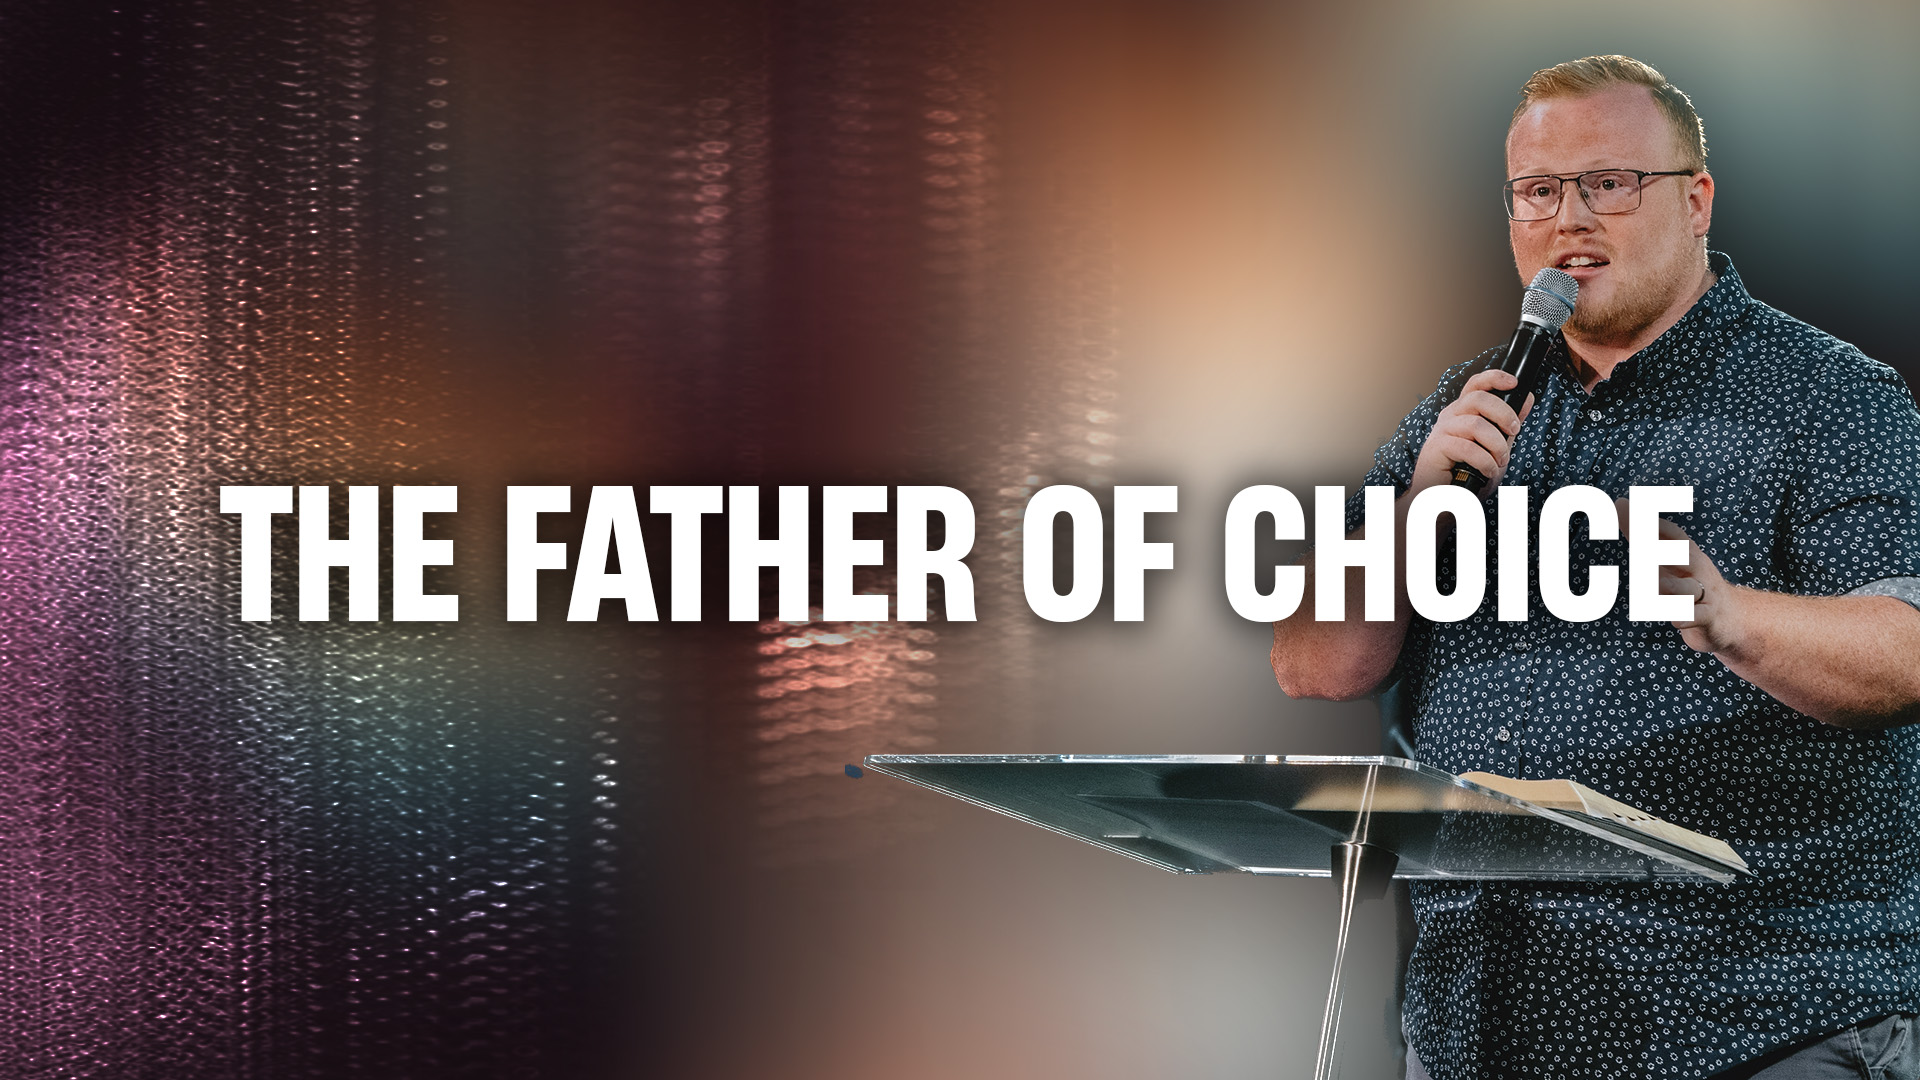 Featured Image for “The Father of Choice”